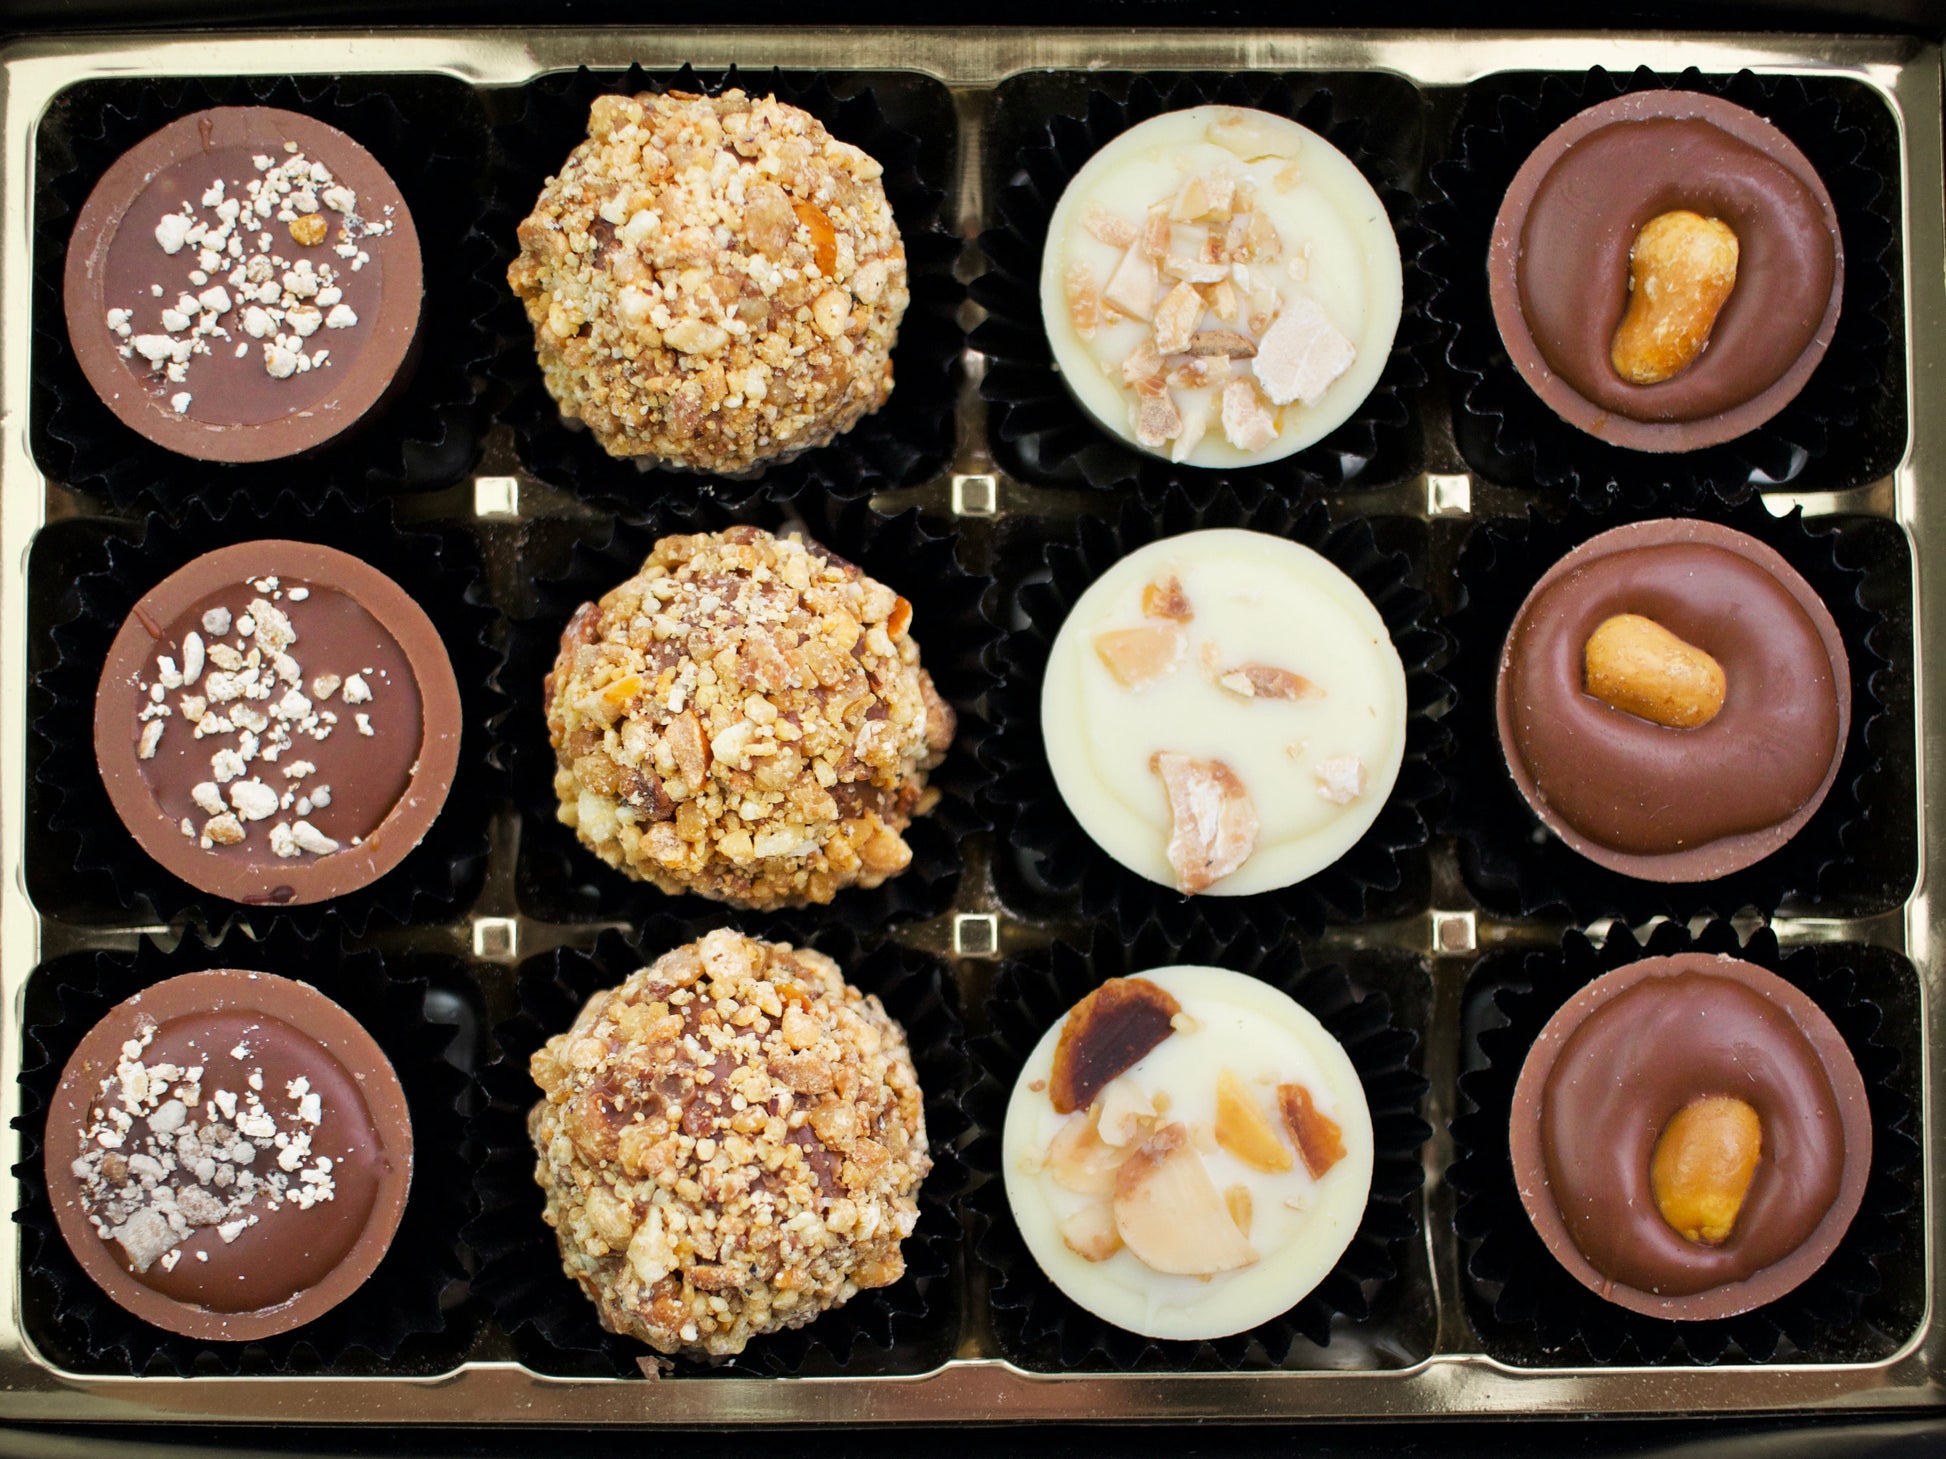 image shows a selection of 12 nut butter and caramel filled chocolates